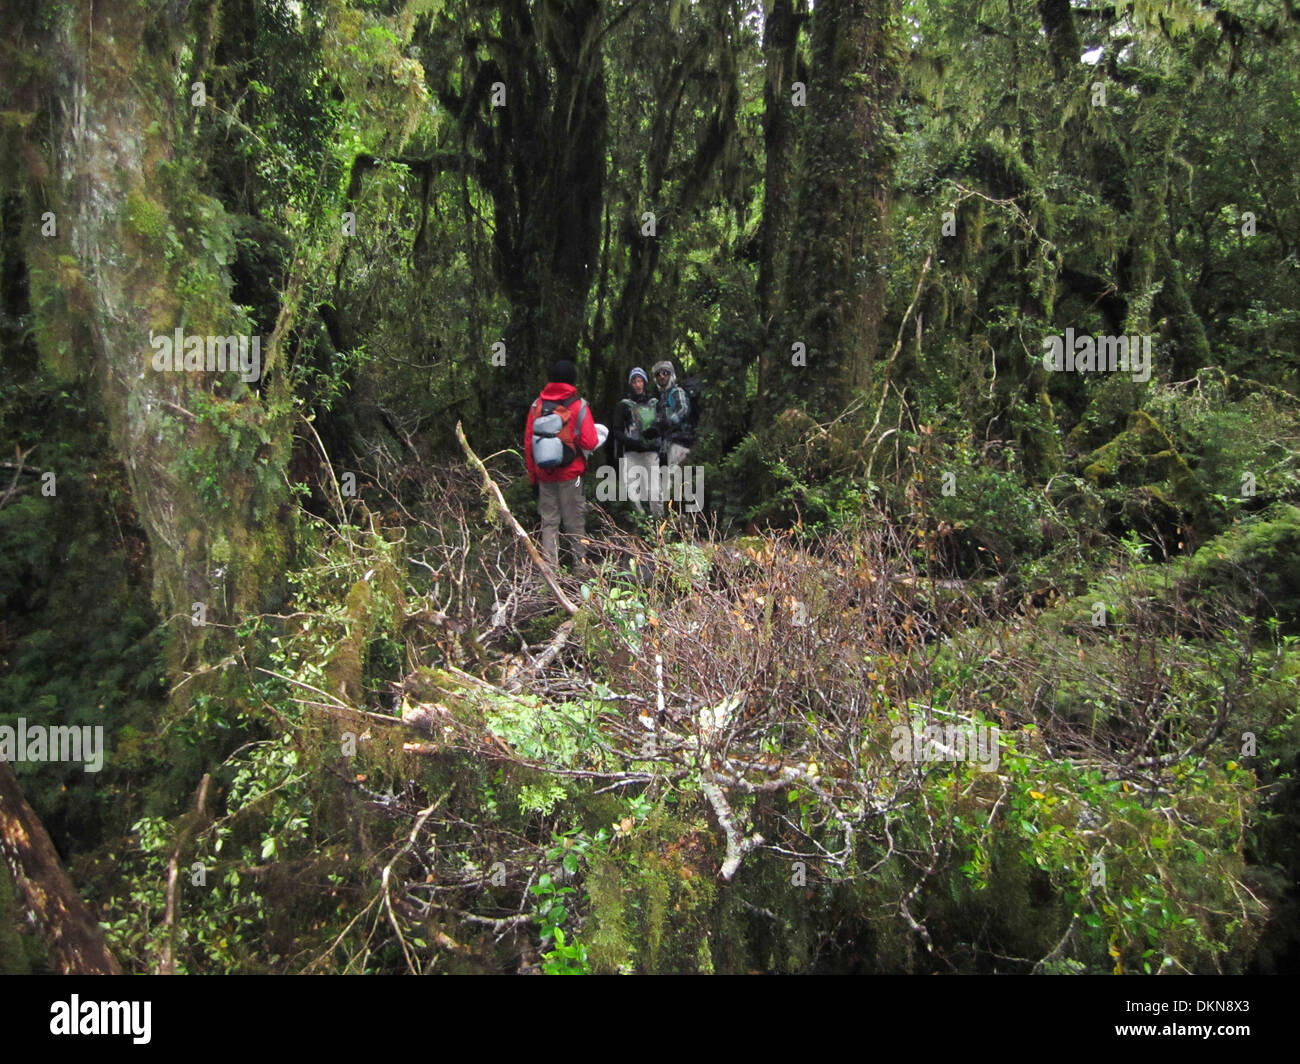 Chile Patagonia, Backpackers hiking in the forest along the Carretera Austral Stock Photo